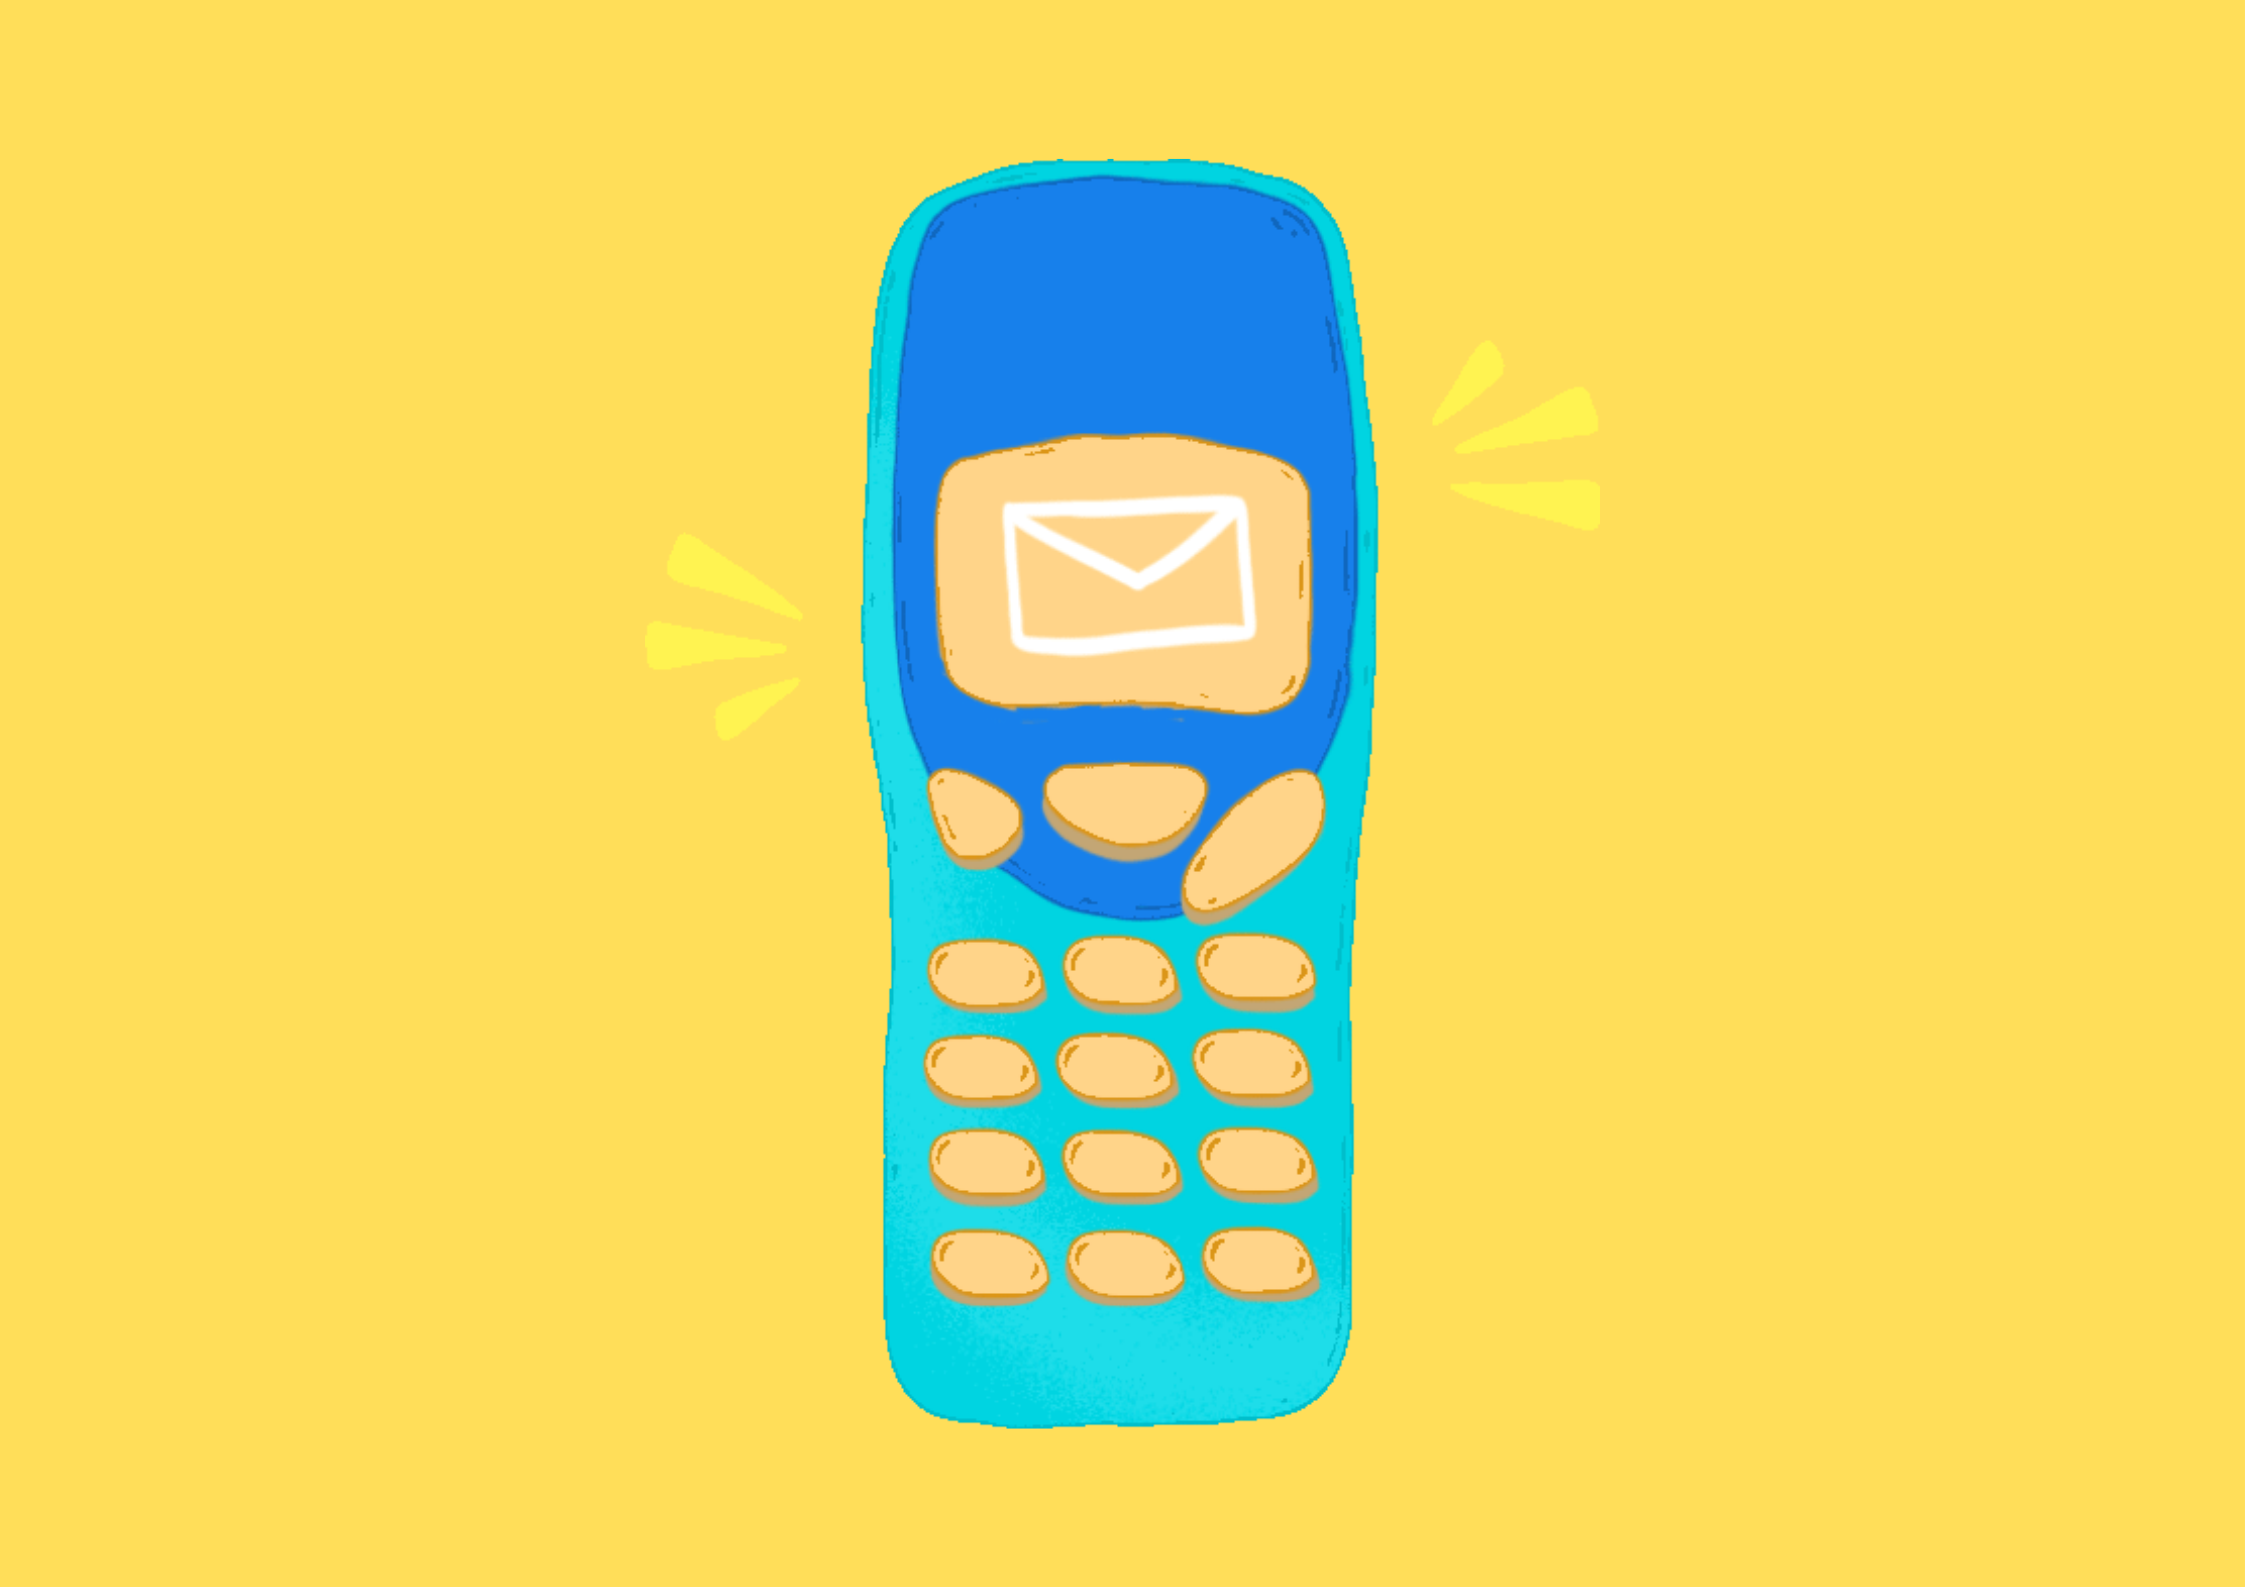 A digital drawing of old-school mobile phone with keypad in blue, turquoise and yellow. There is an envelope on the phone's screen and action lines on either side of the phone to indicate a message alert. The background is yellow.